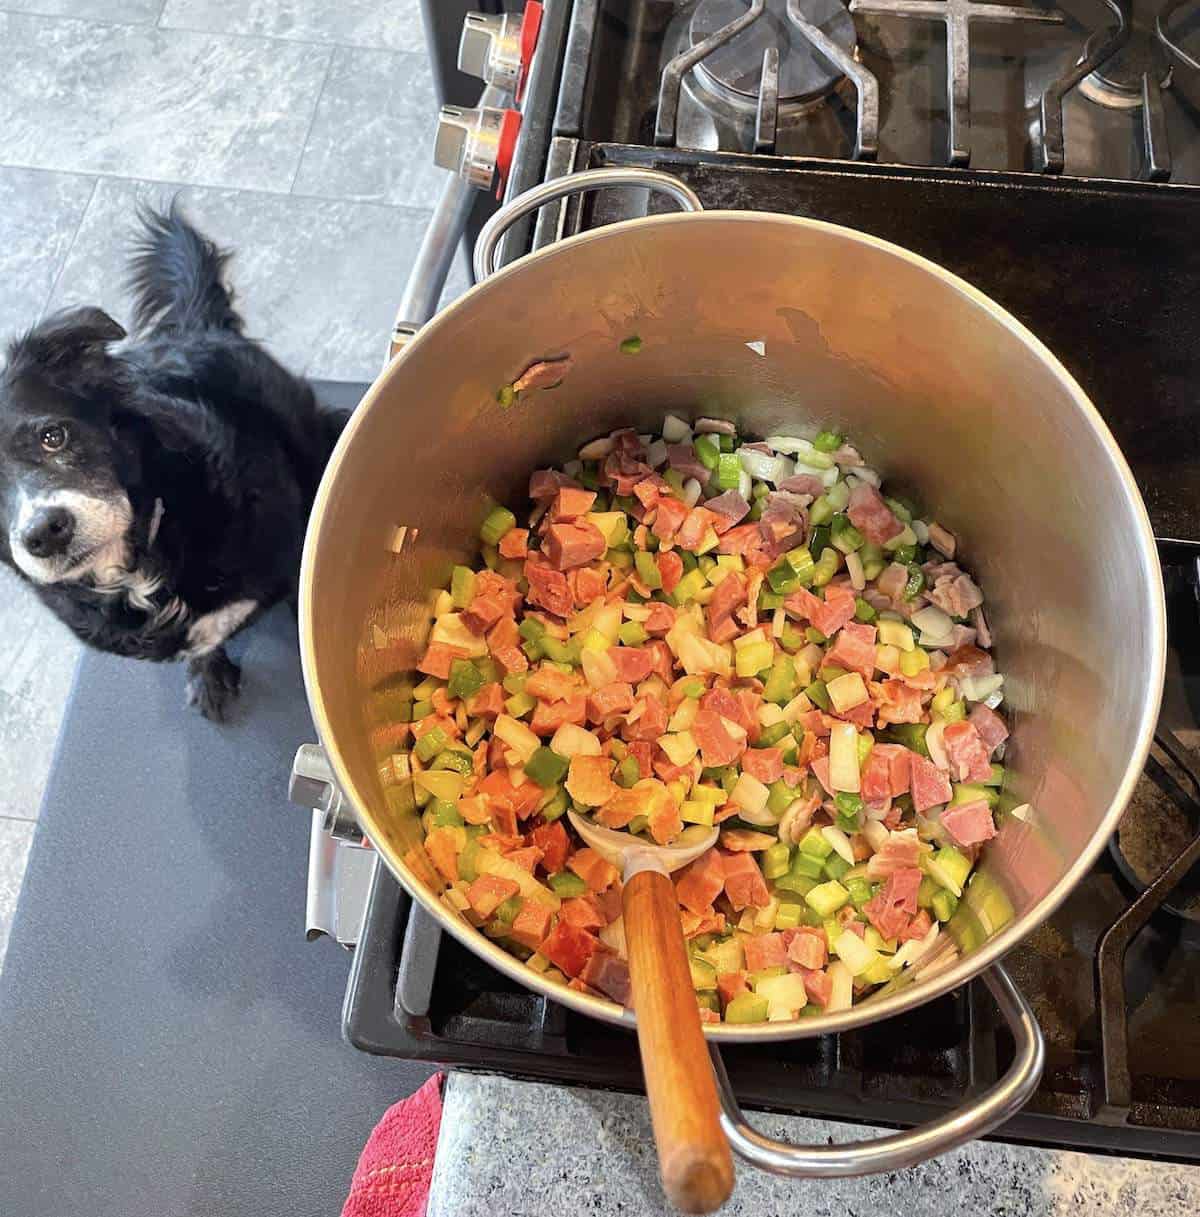 A black dog staring at a pot of the holy trinity cooking with ham to make red beans and rice.